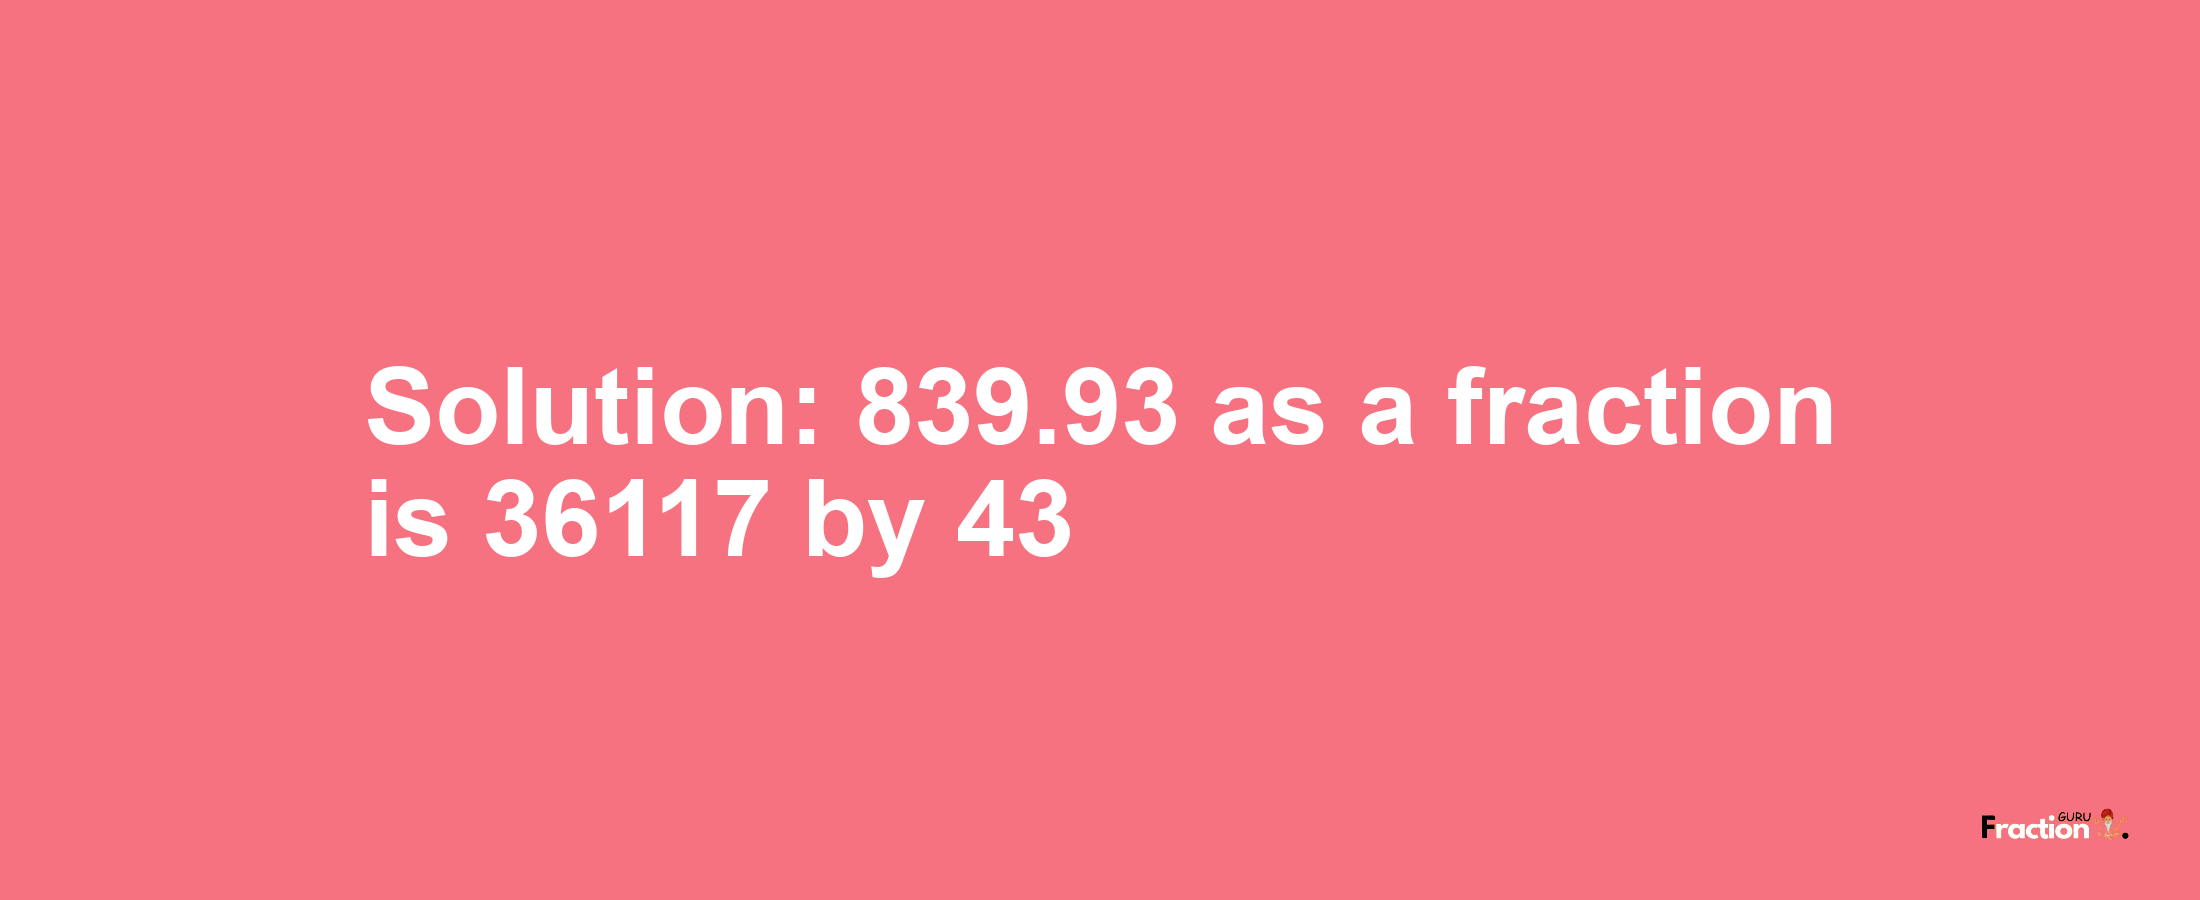 Solution:839.93 as a fraction is 36117/43